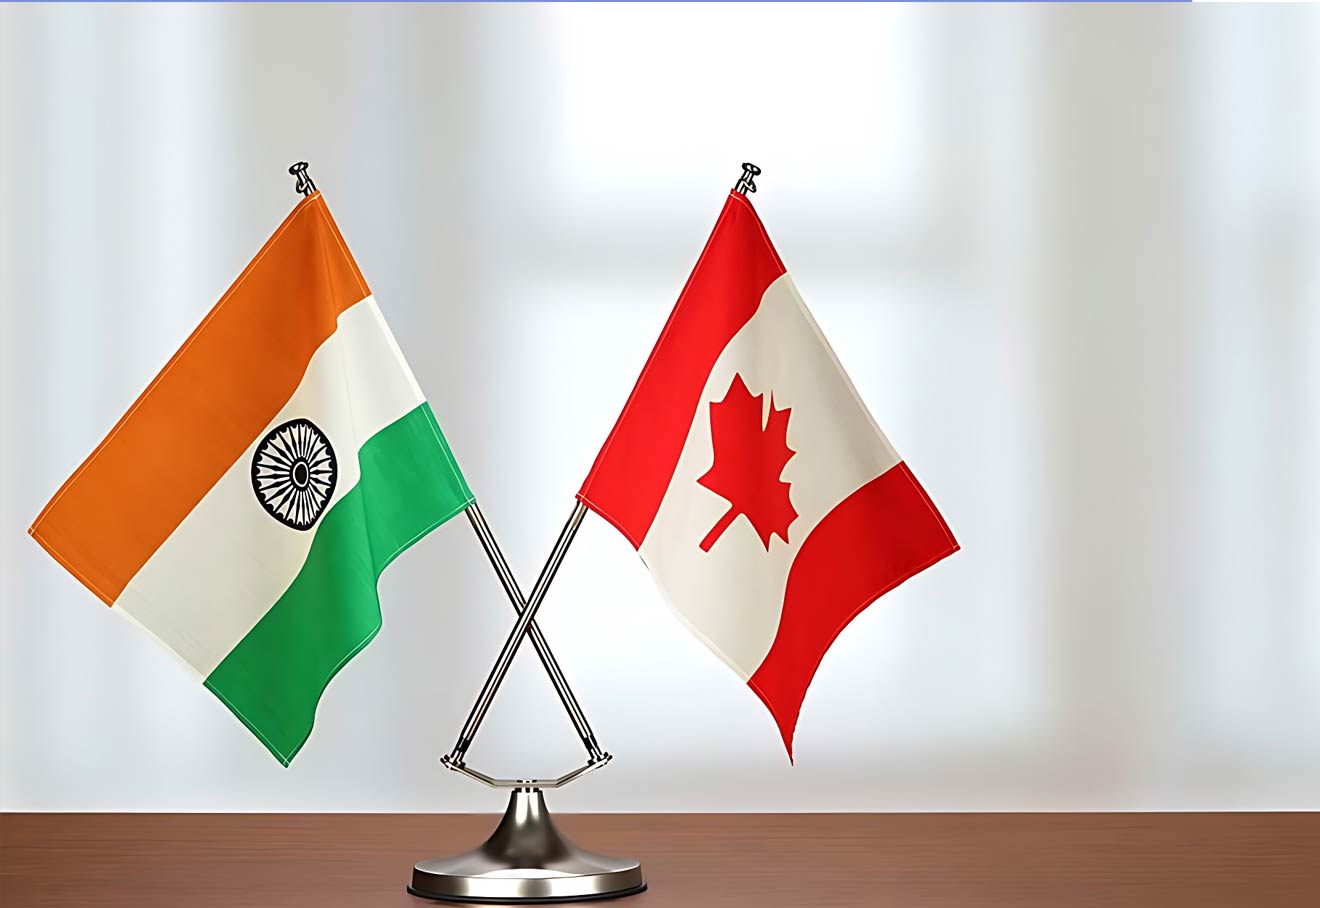 Trade Concerns Loom As India-Canada Lock Horns Over Political Issues